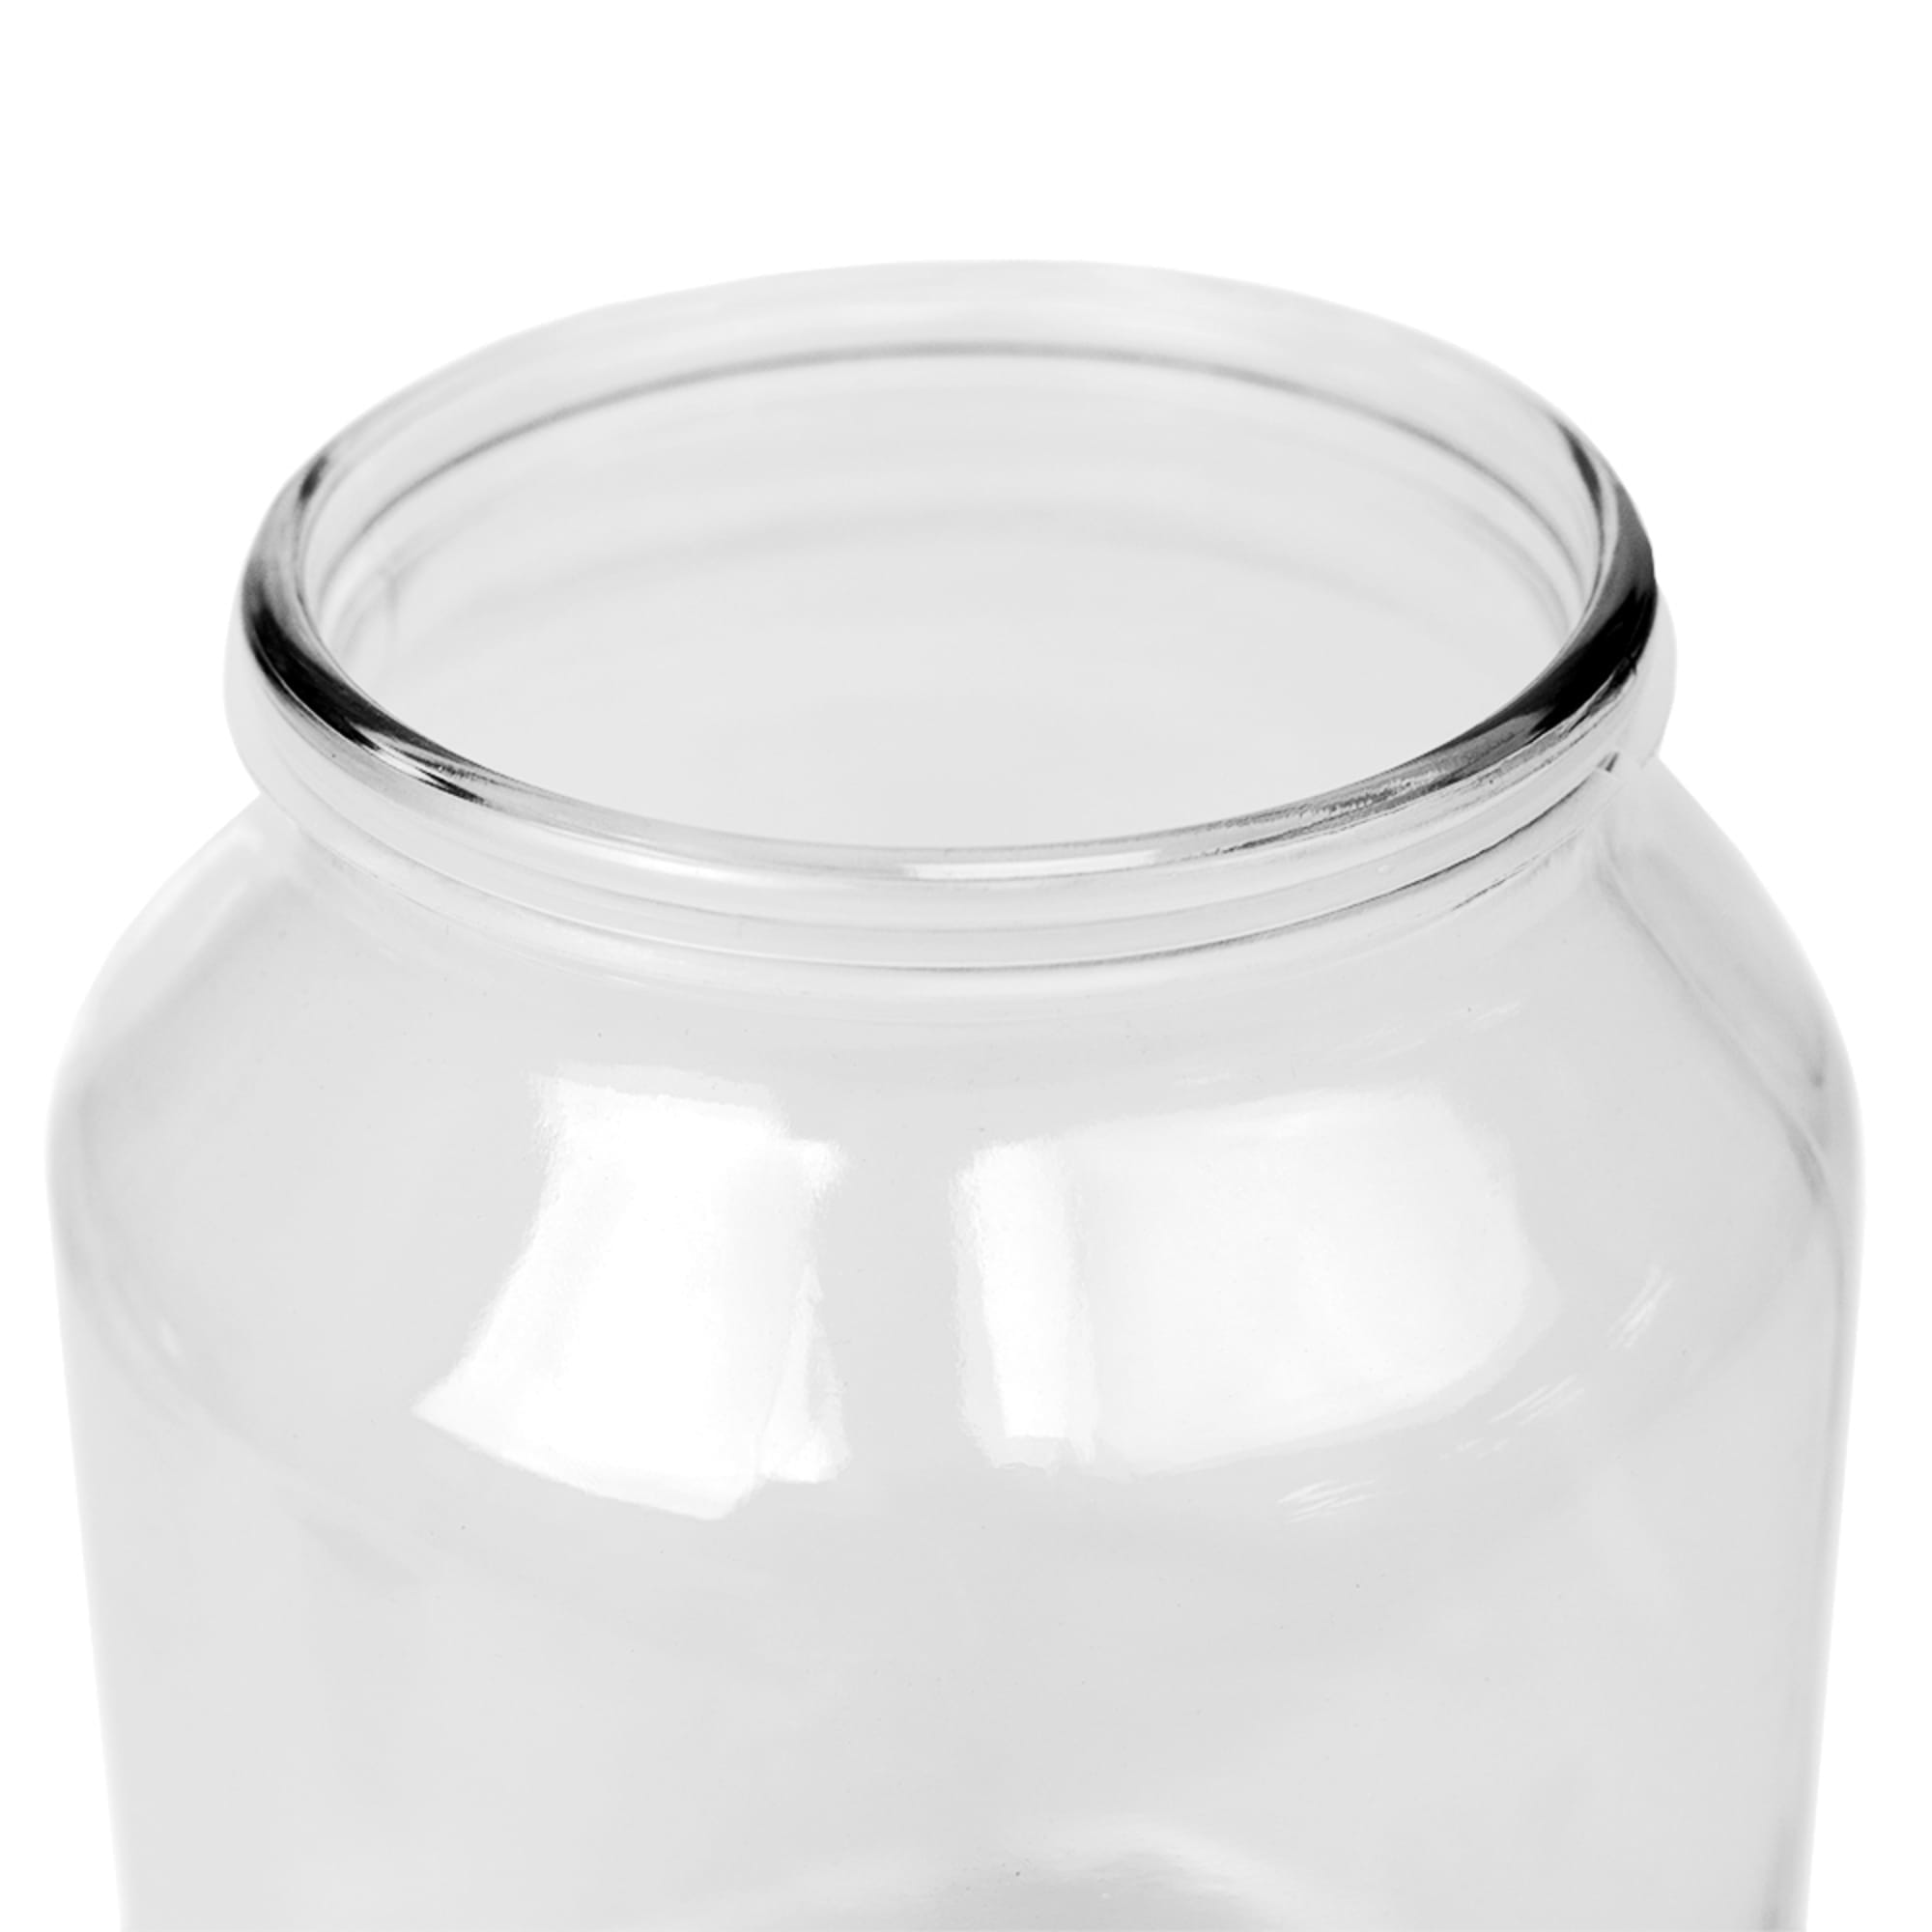 Home Basics Artisan 3 Lt Glass Jar with Black Top $5.00 EACH, CASE PACK OF 4